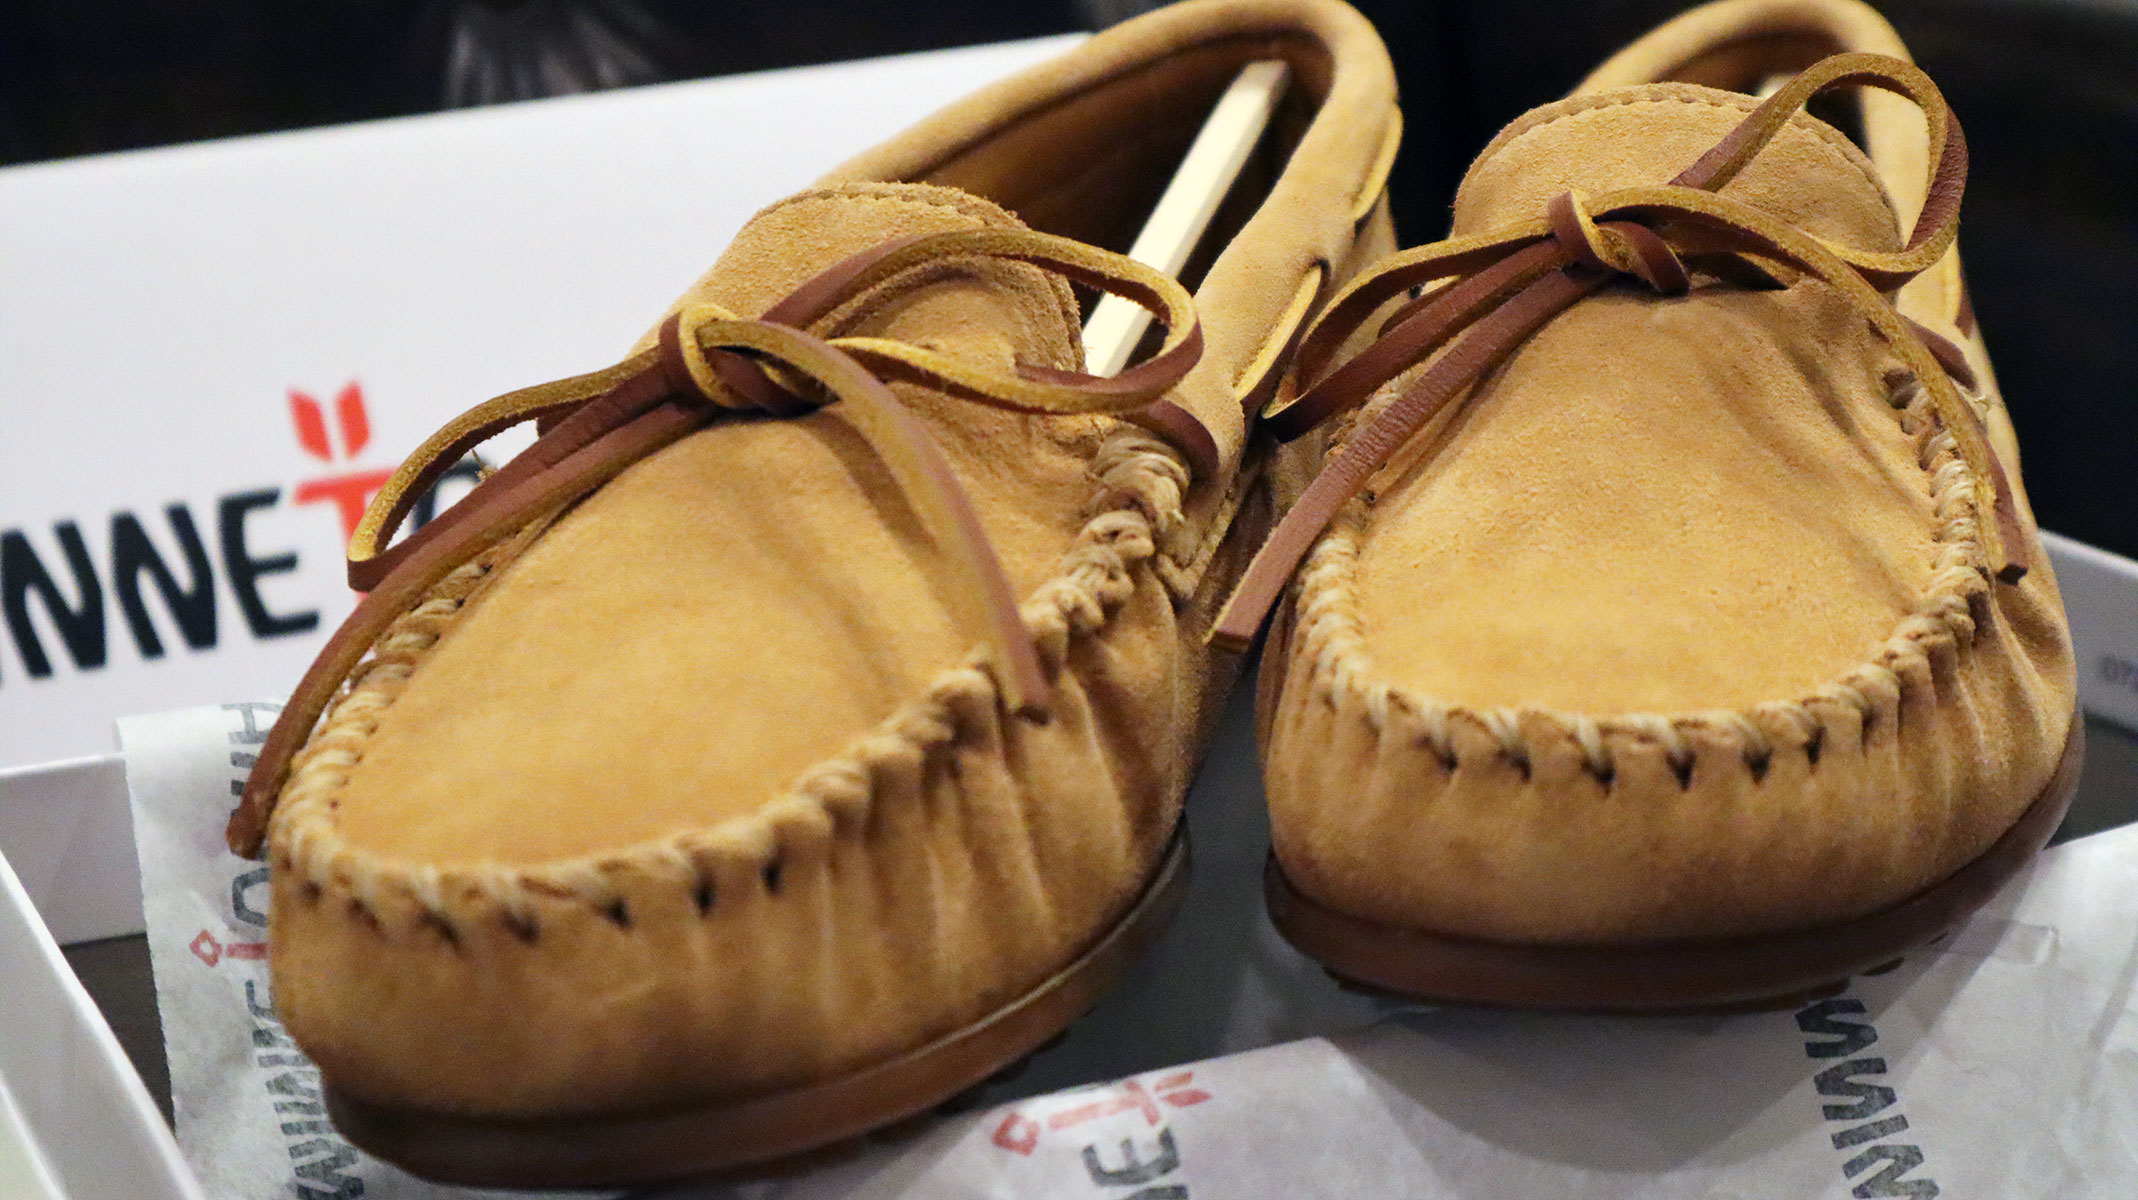 Minnetonka Review: The Best Moccasins for the Price?